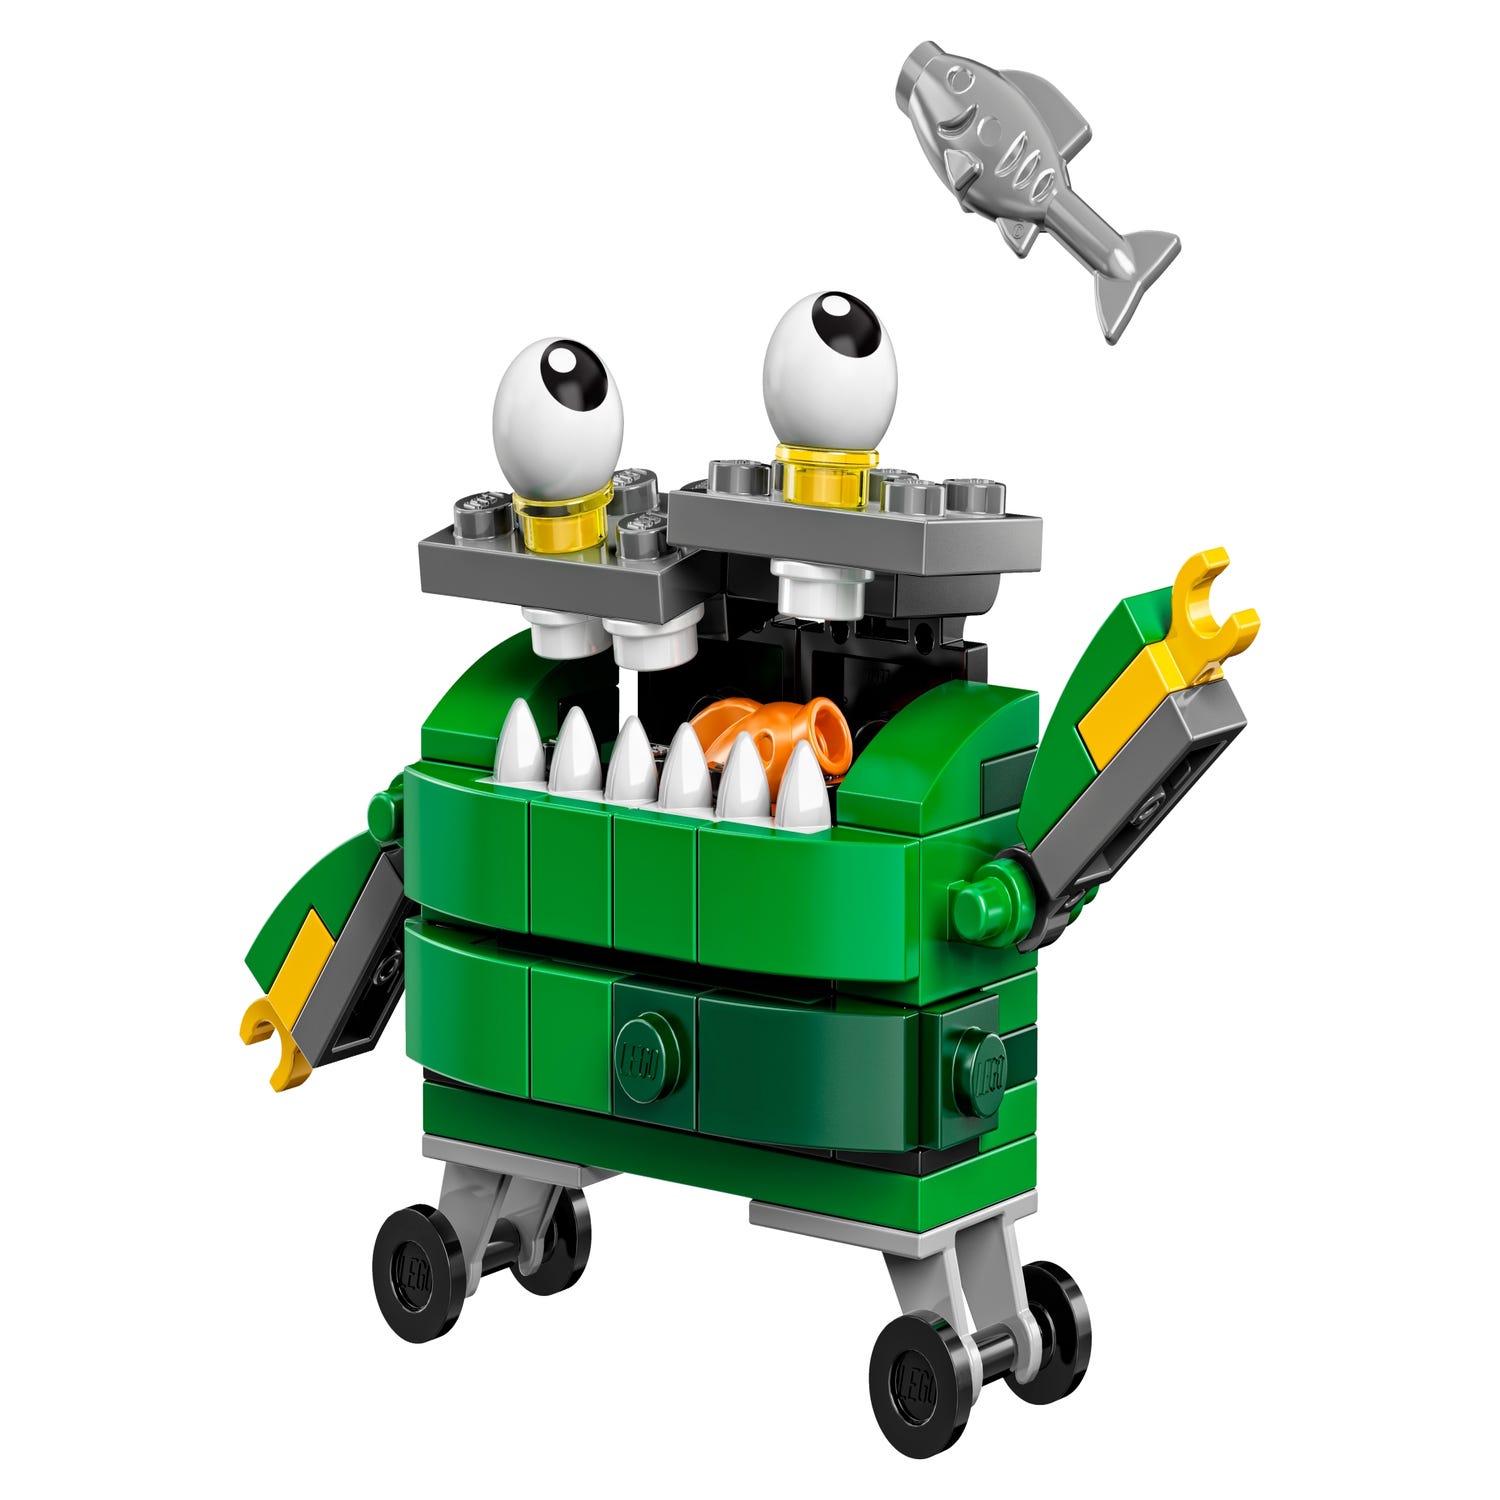 41572 Mixels™ | Buy online at the Official LEGO® Shop US